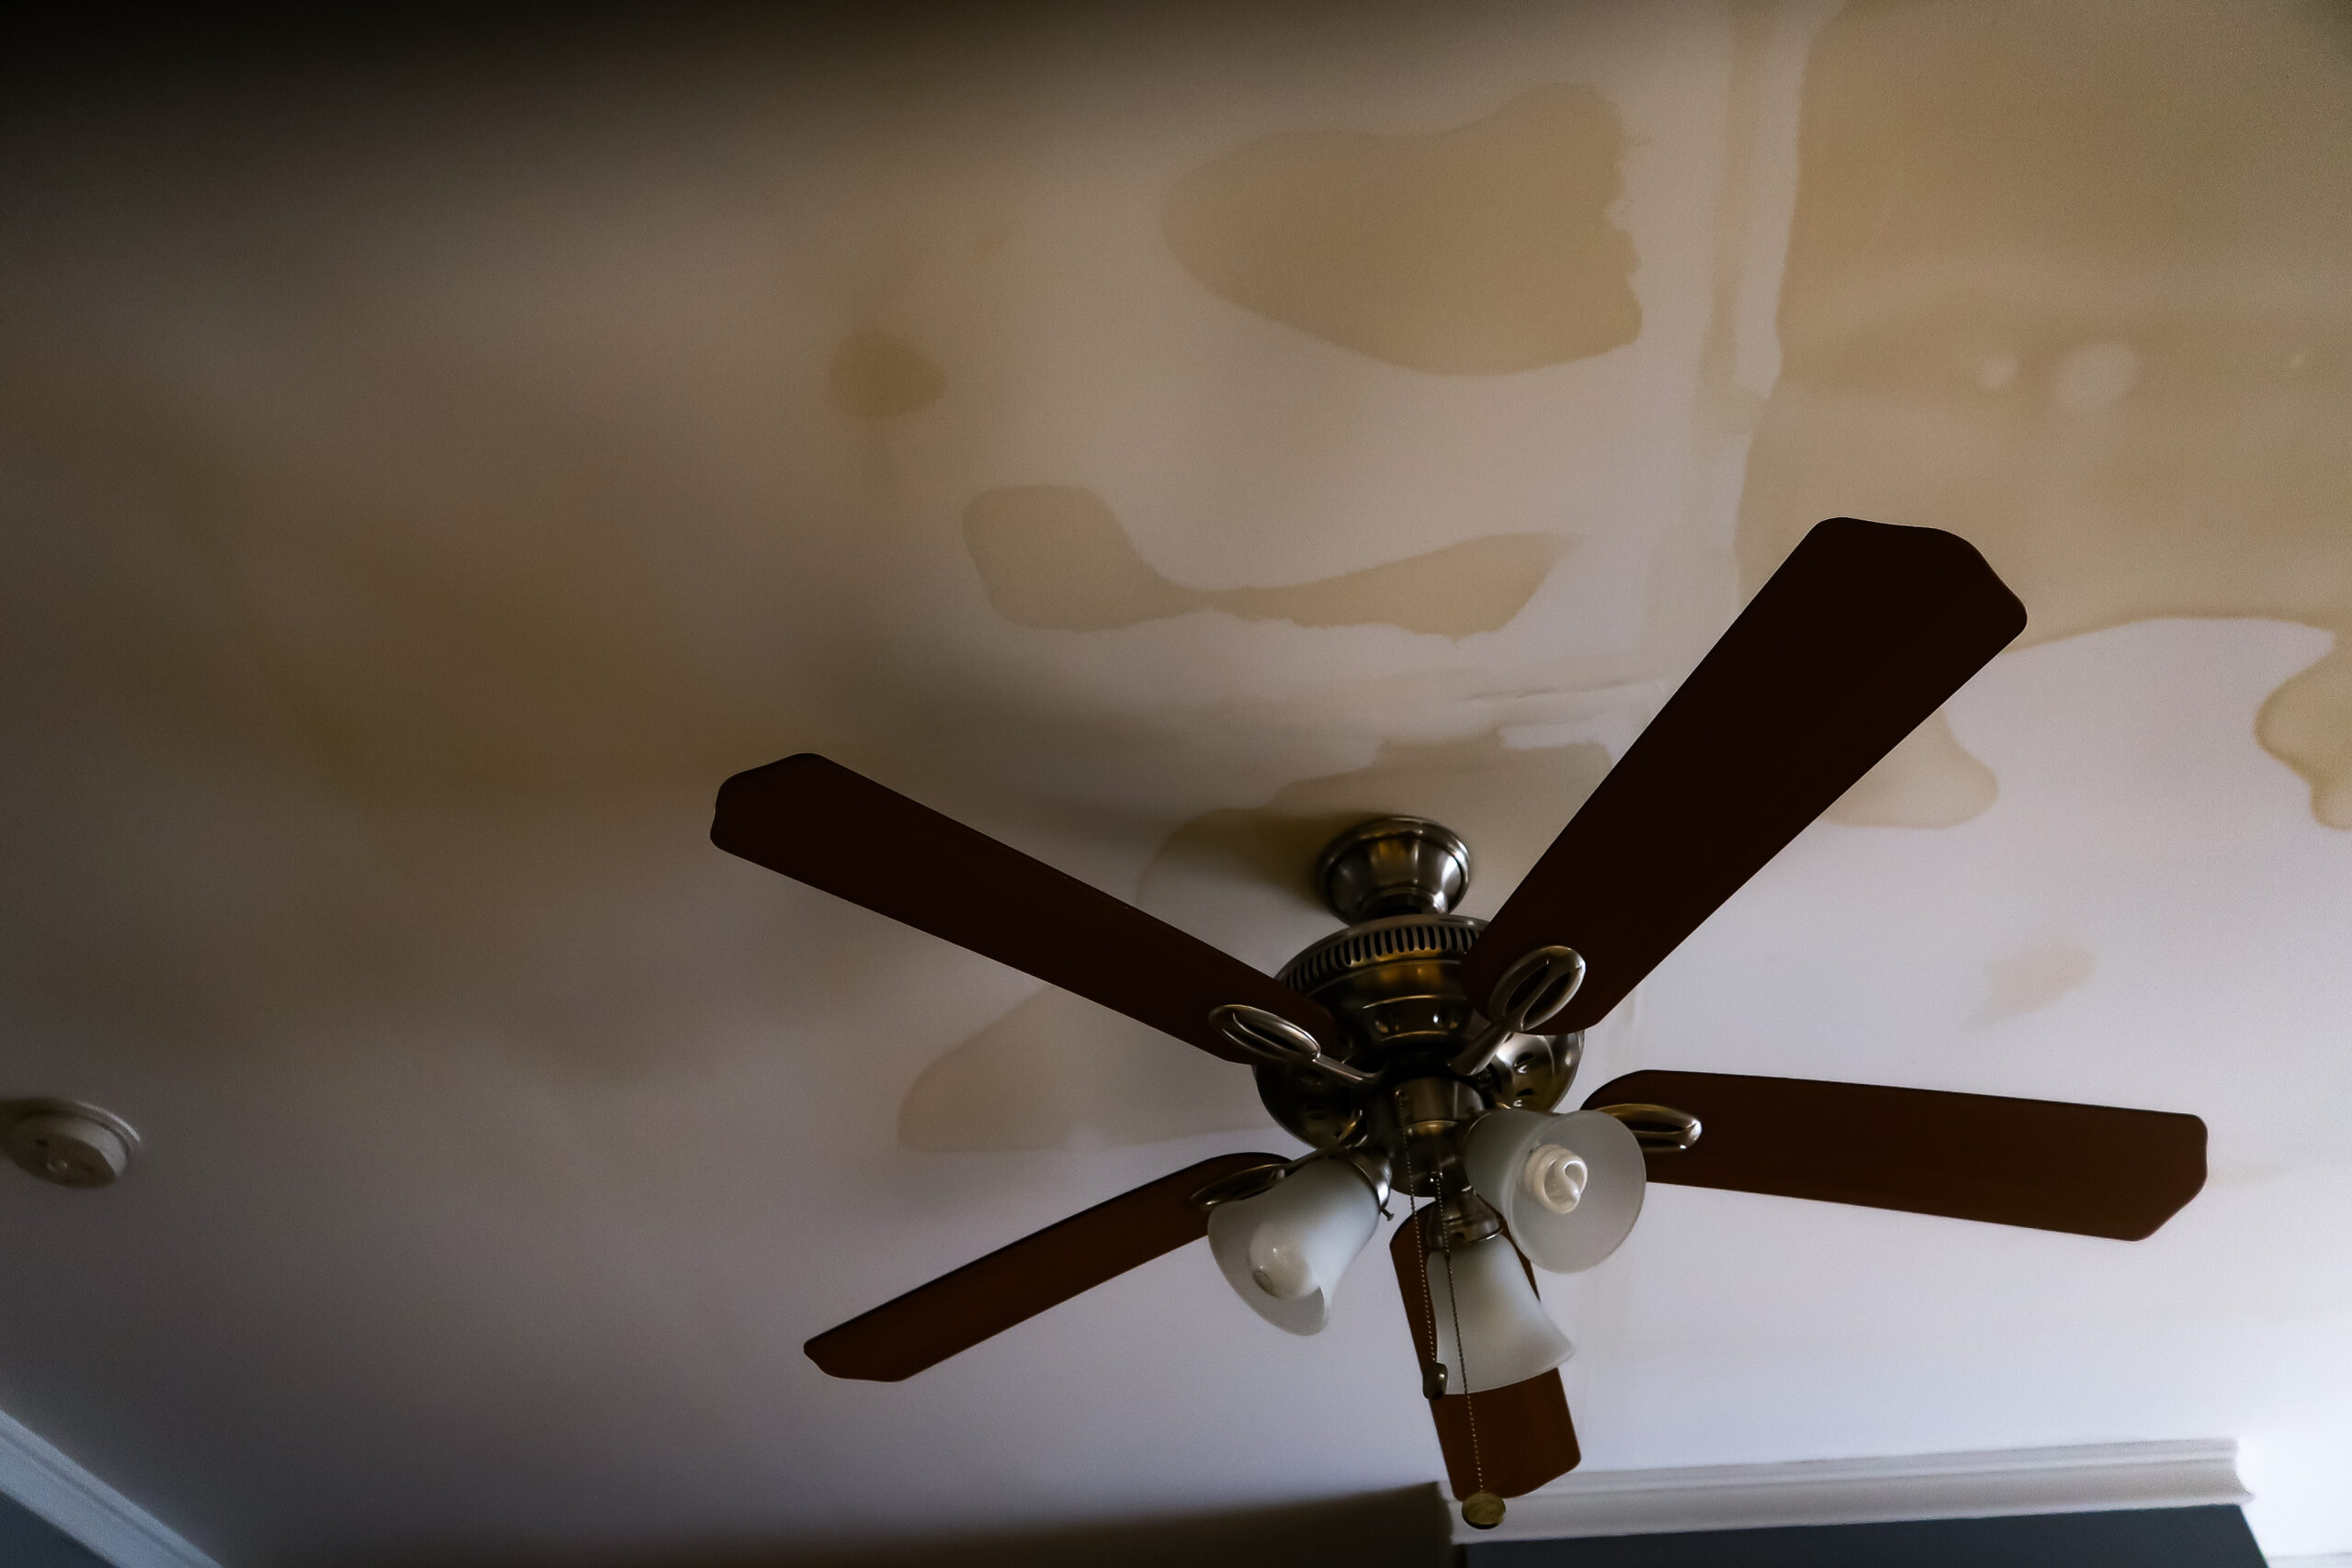 Water Damage Stains on ceiling, water damage restoration work in central falls, ri